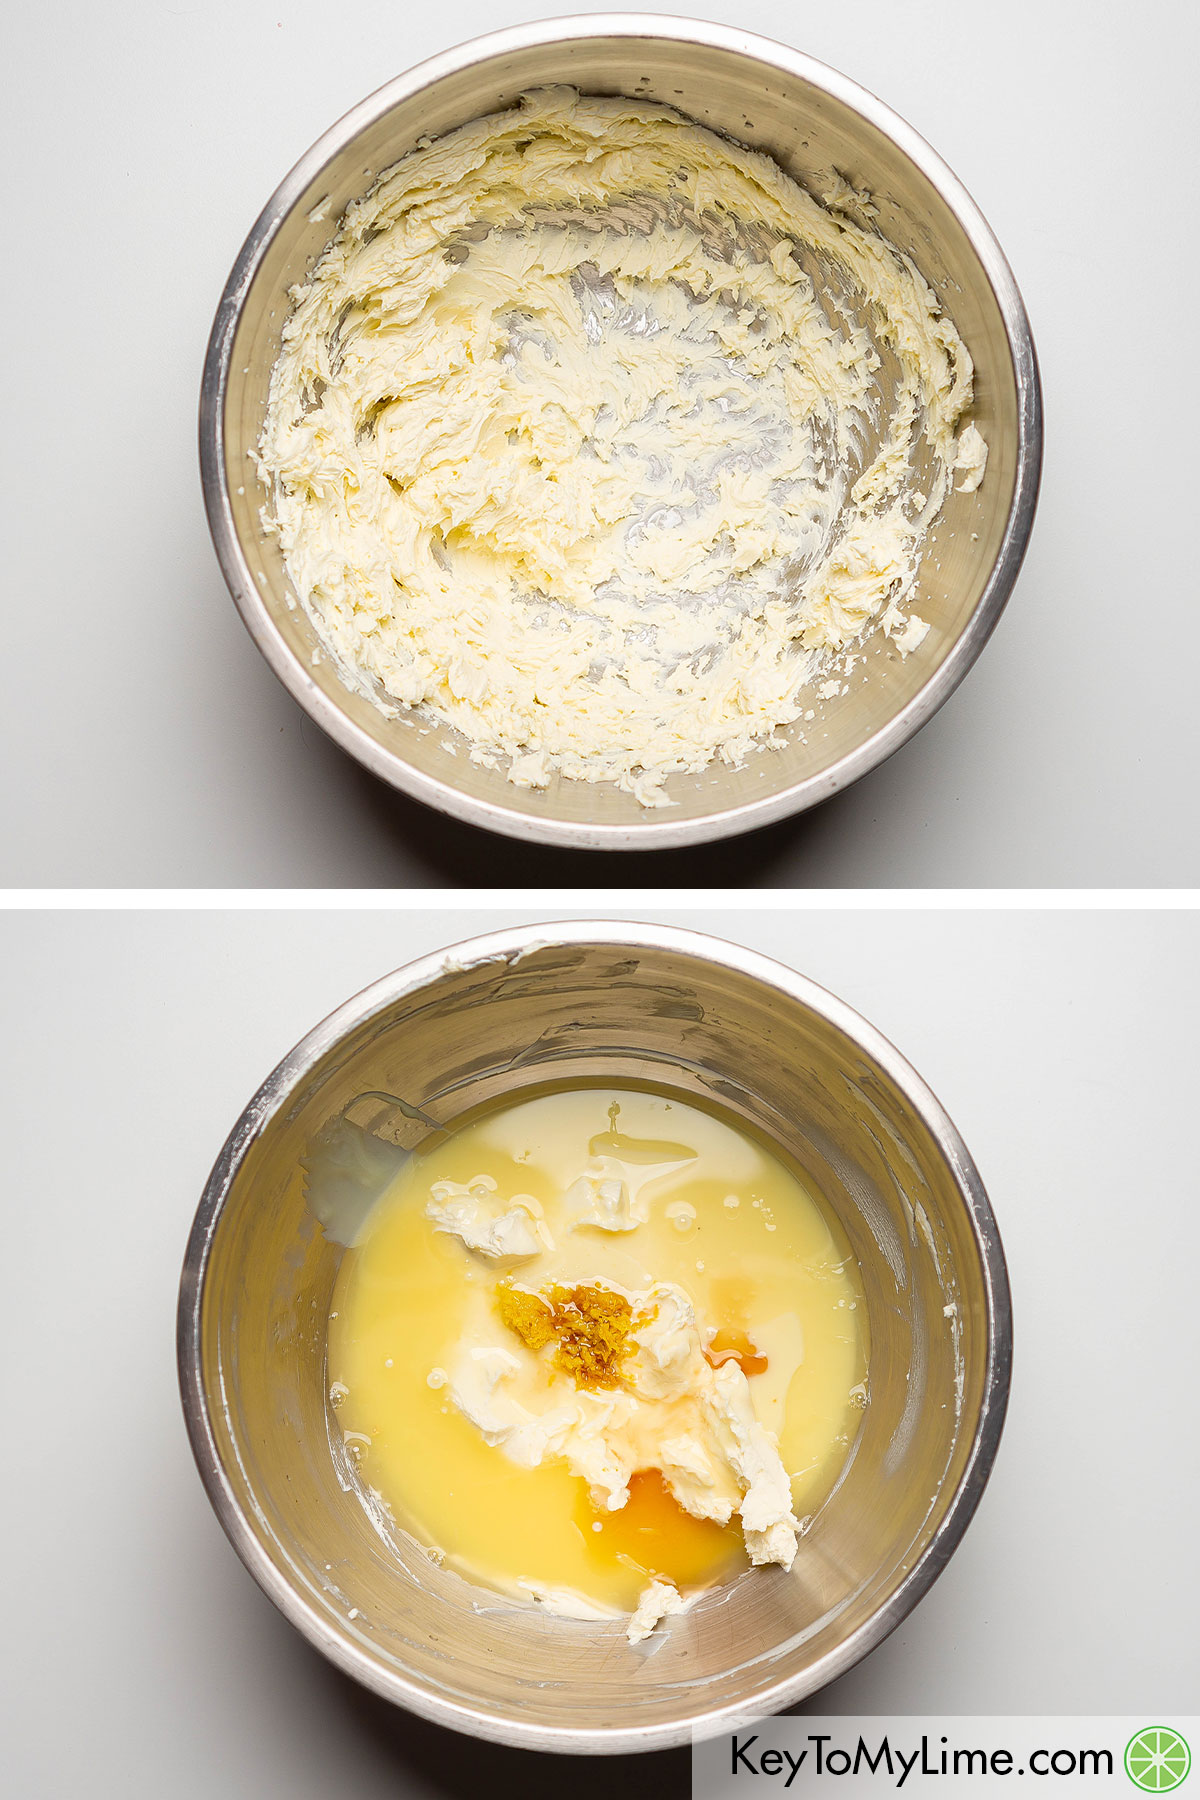 Beating the cream cheese with a hand mixer then adding in the sweetened condensed milk, lemon juice, lemon zest and vanilla extract to the mixing bowl.